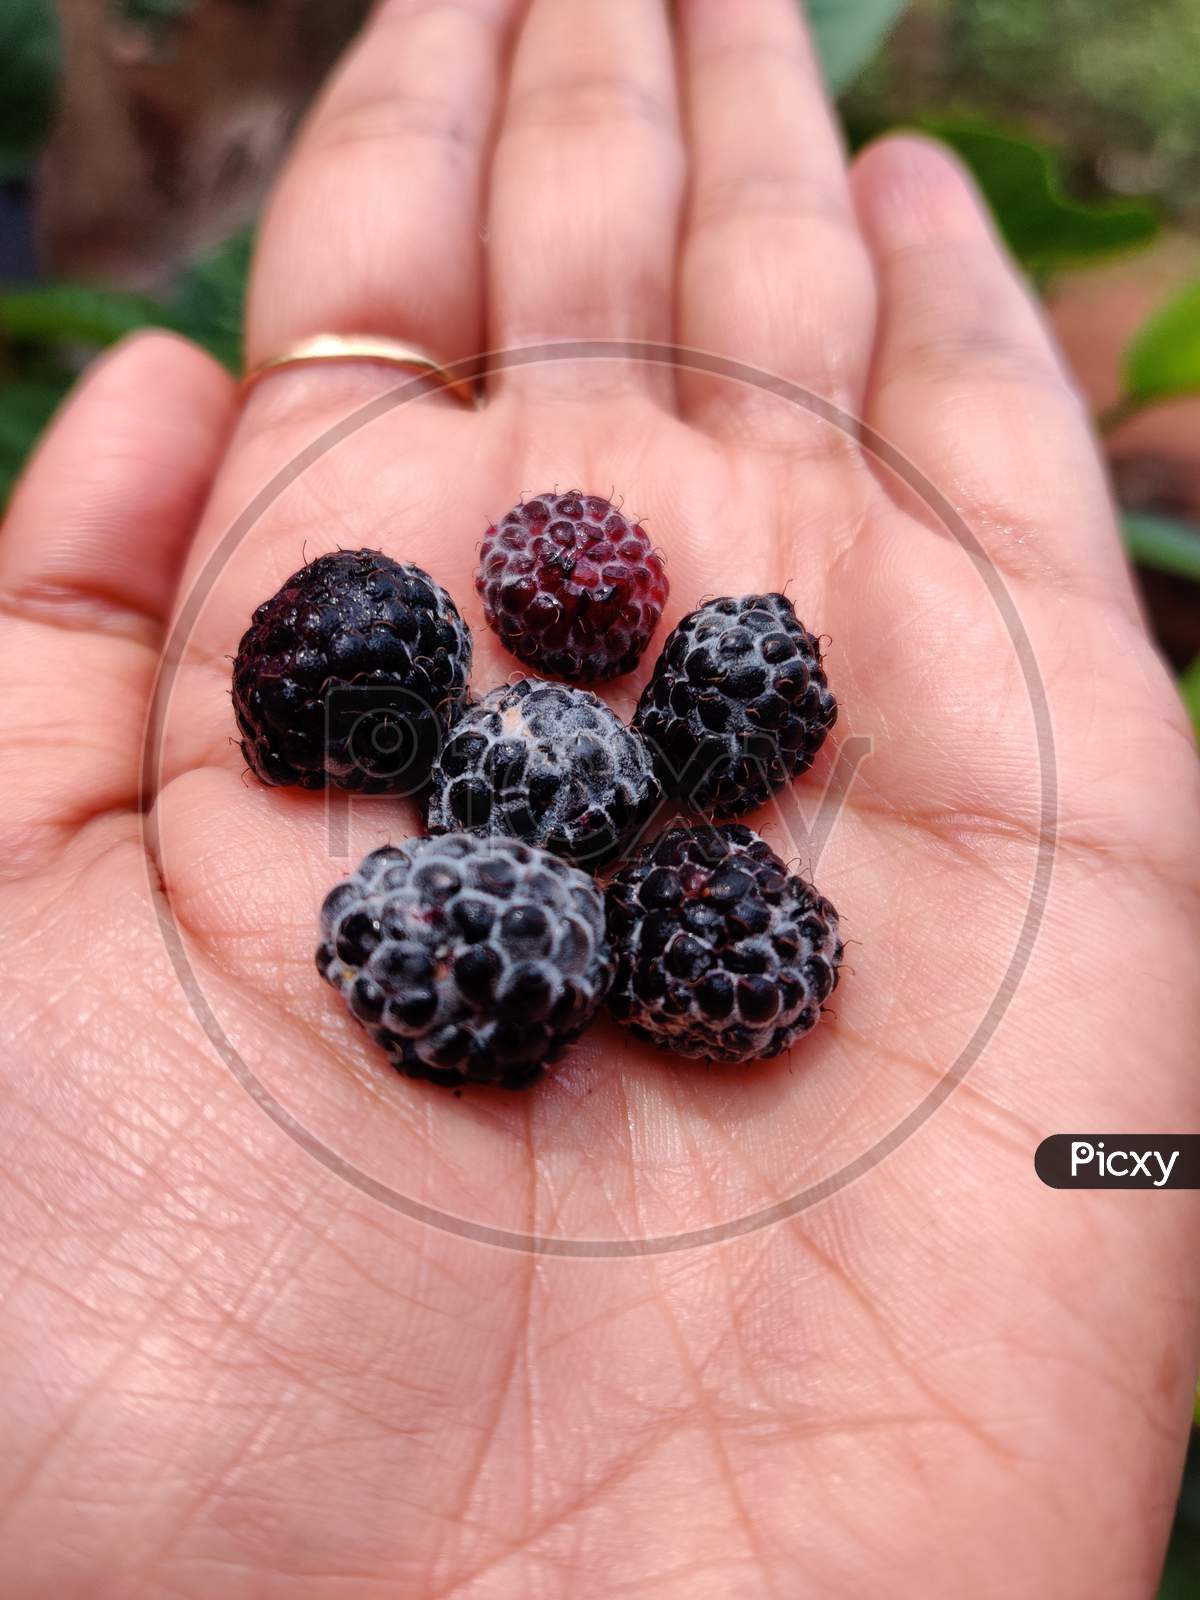 black mulberry fruits kept in hand.